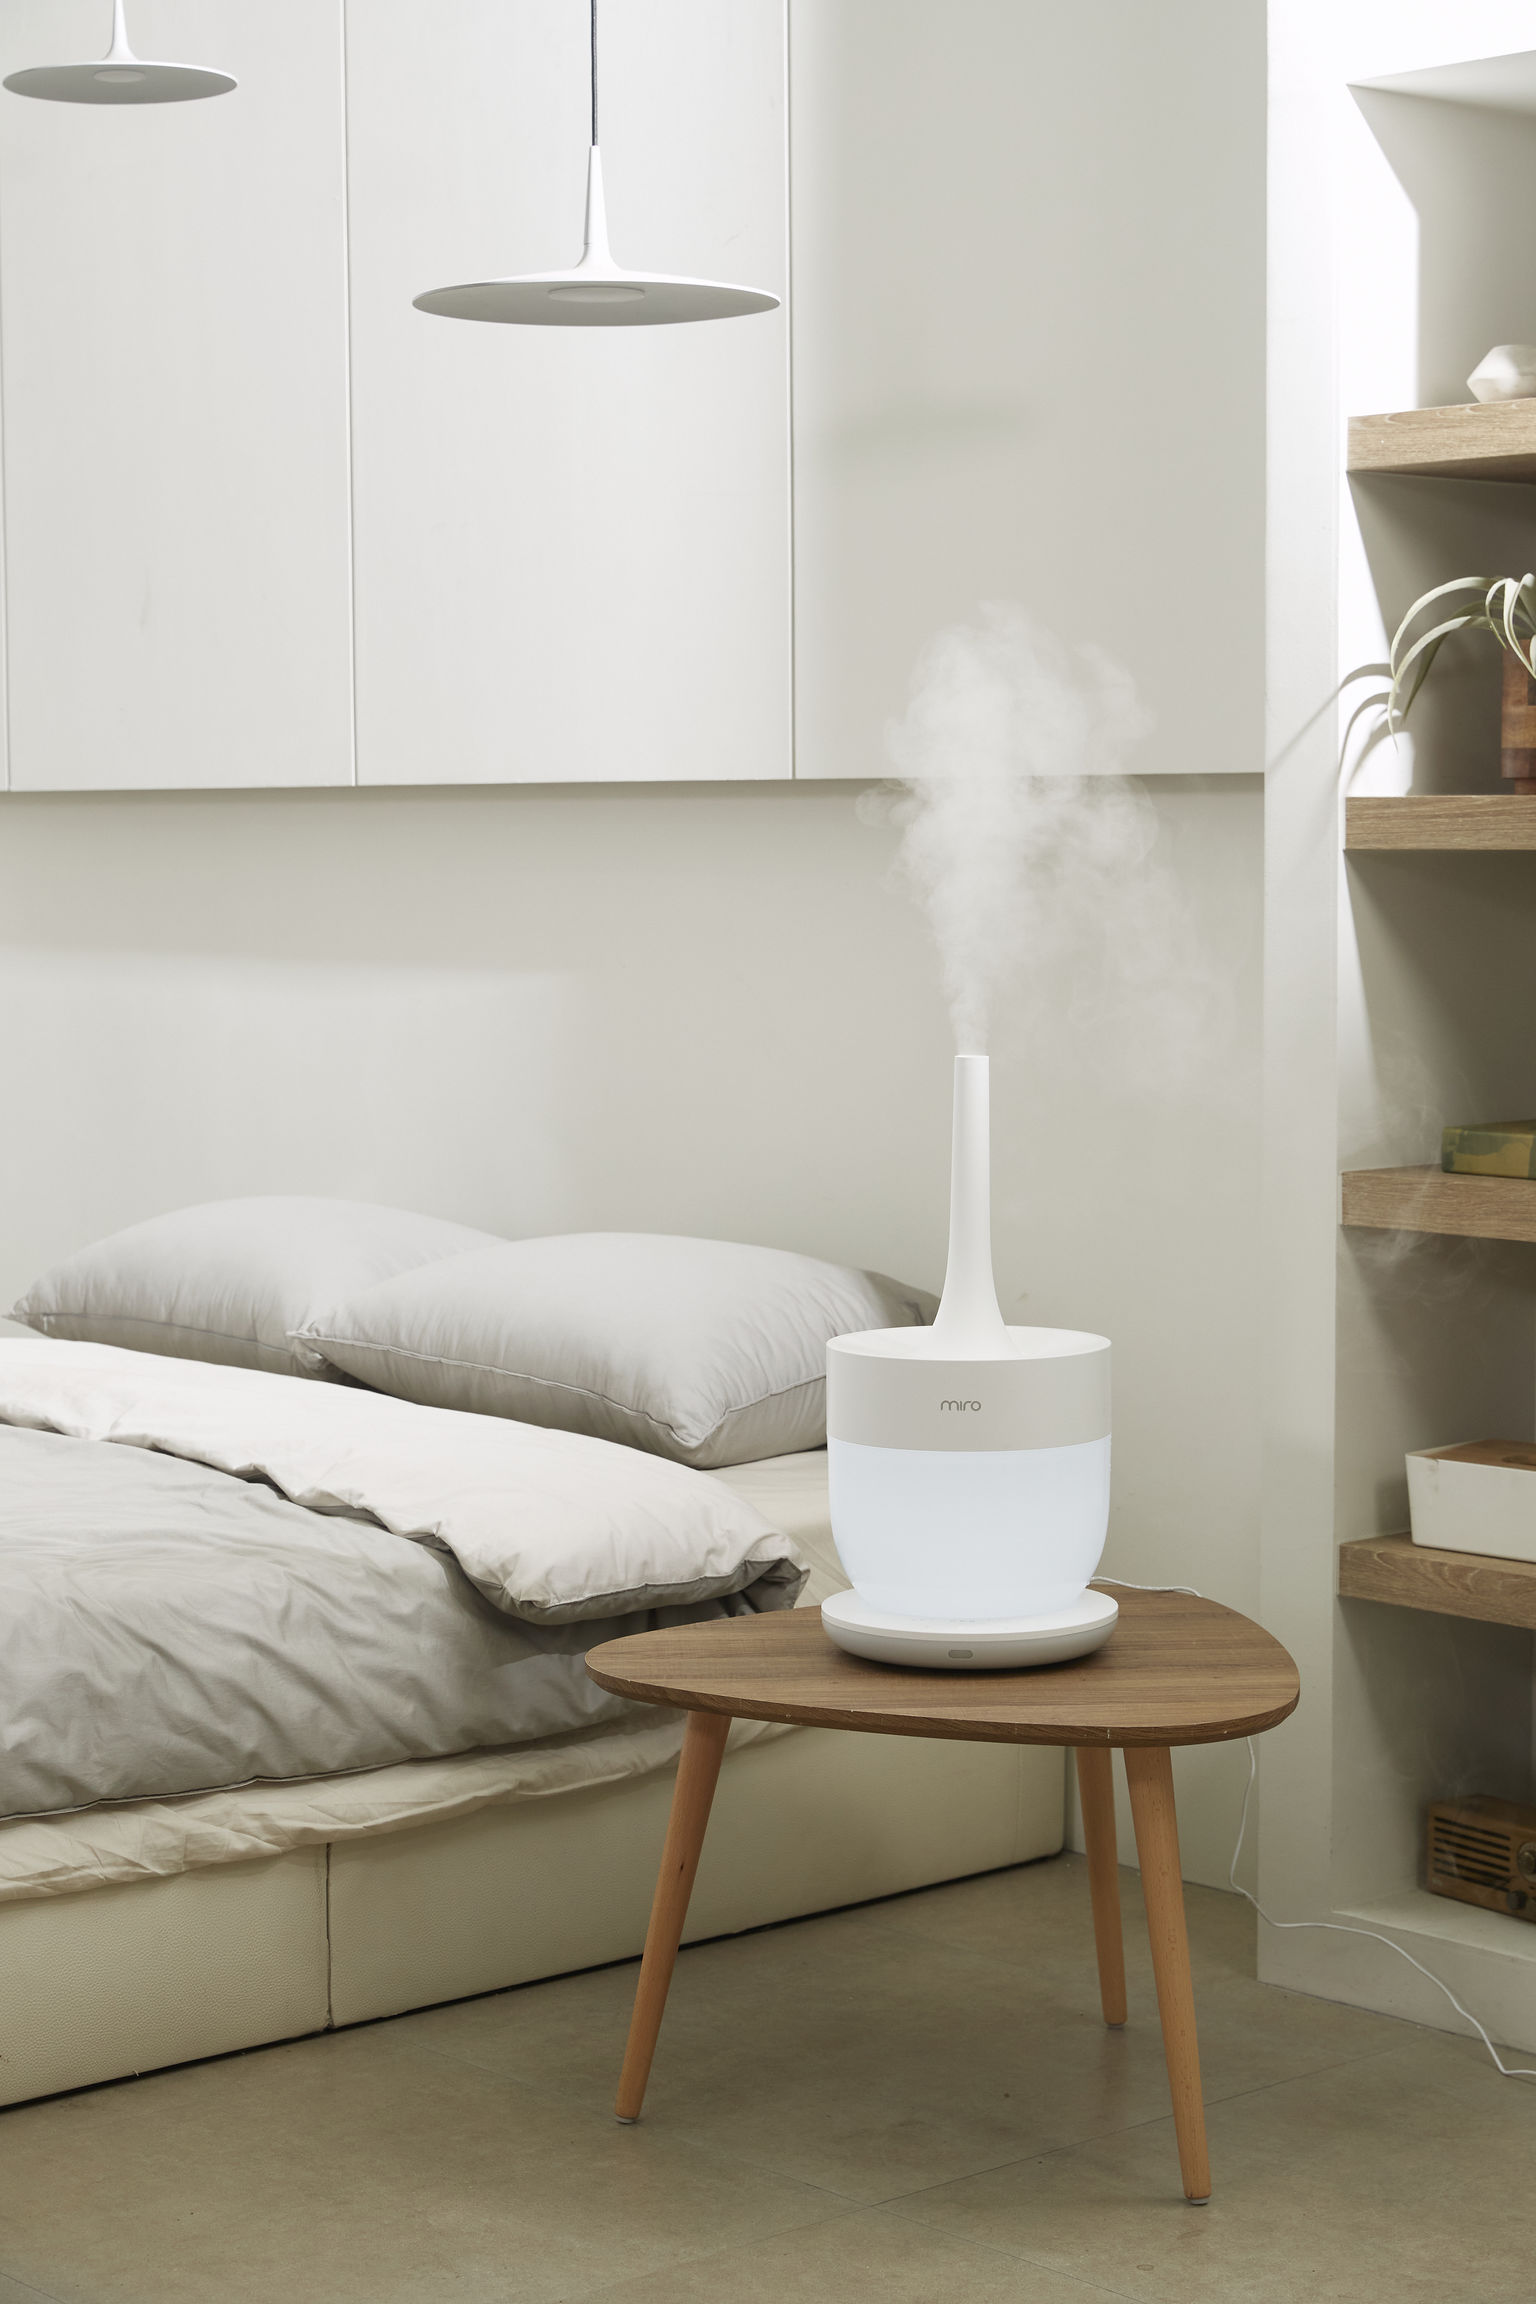 Miro Completely Washable Humidifier